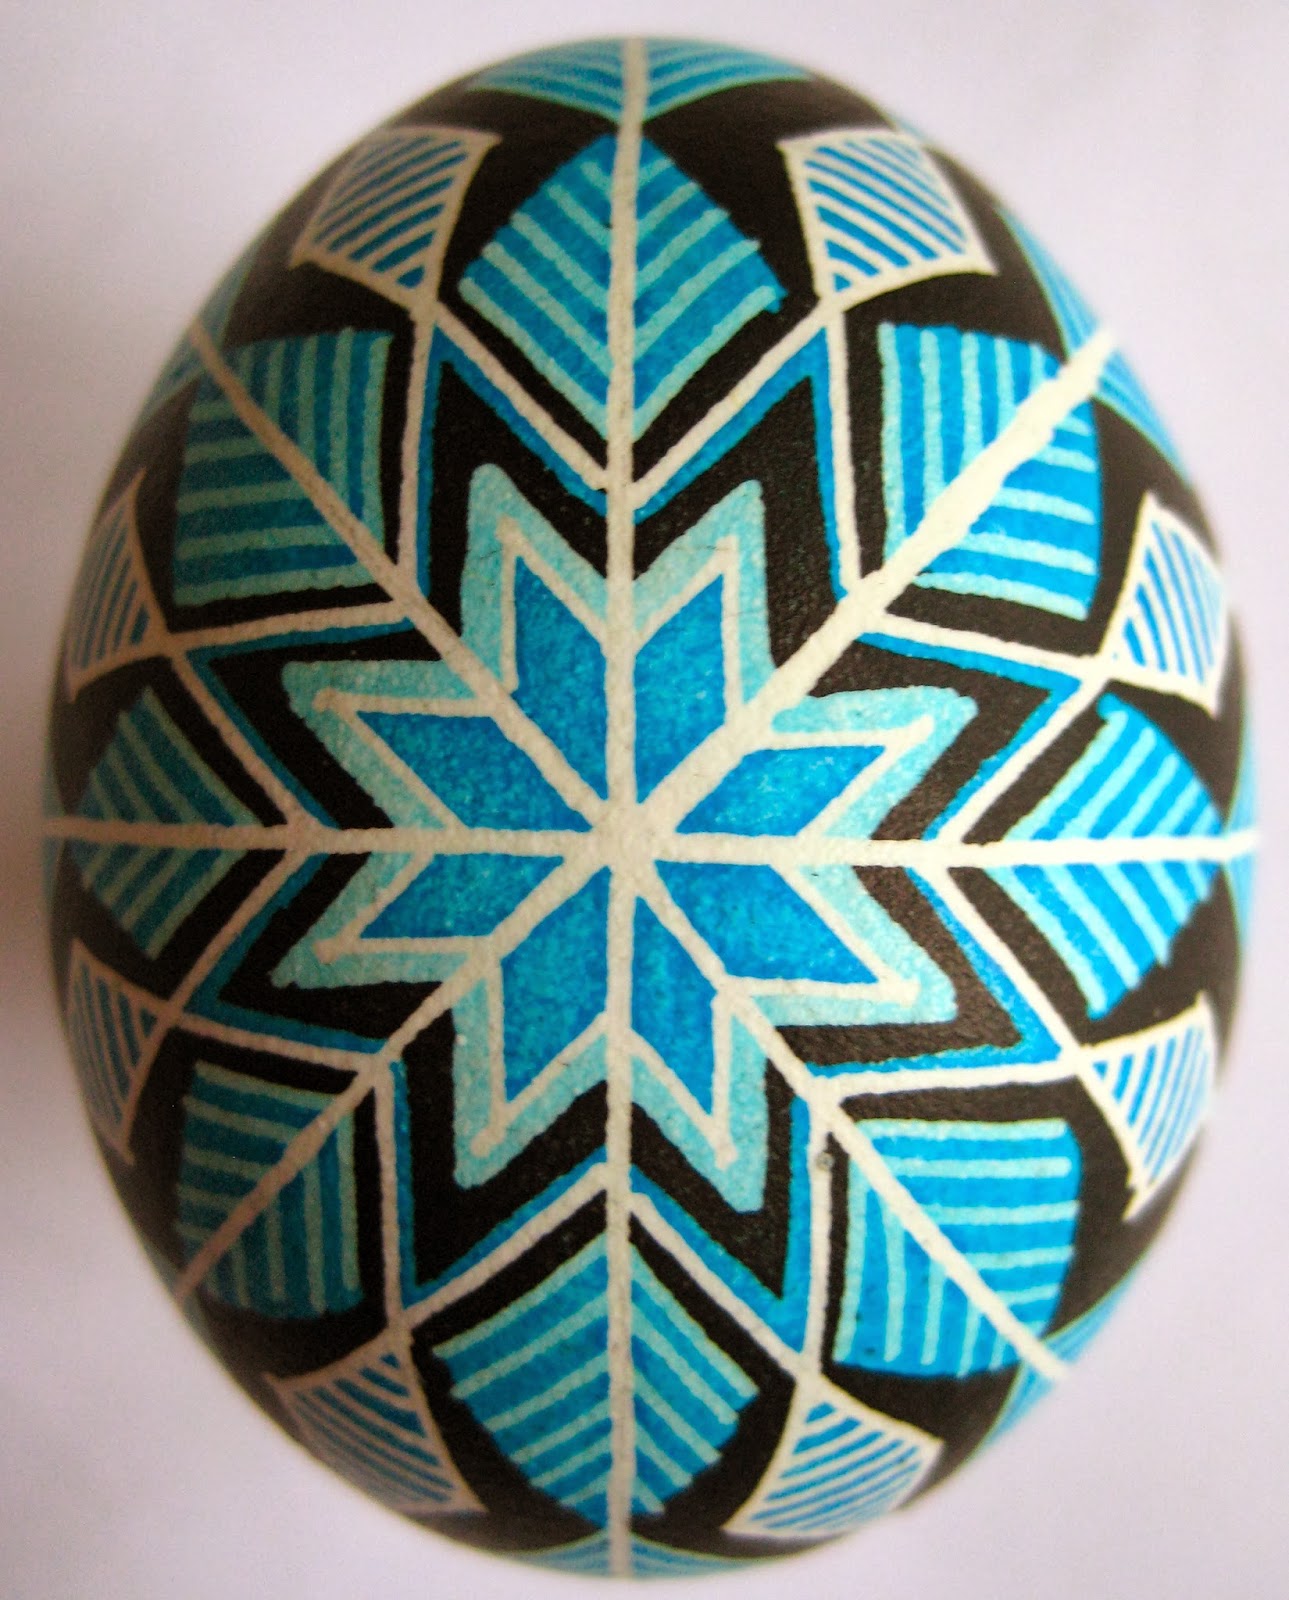 saving-the-world-one-egg-at-a-time-a-snowflake-from-a-ruzha-pattern